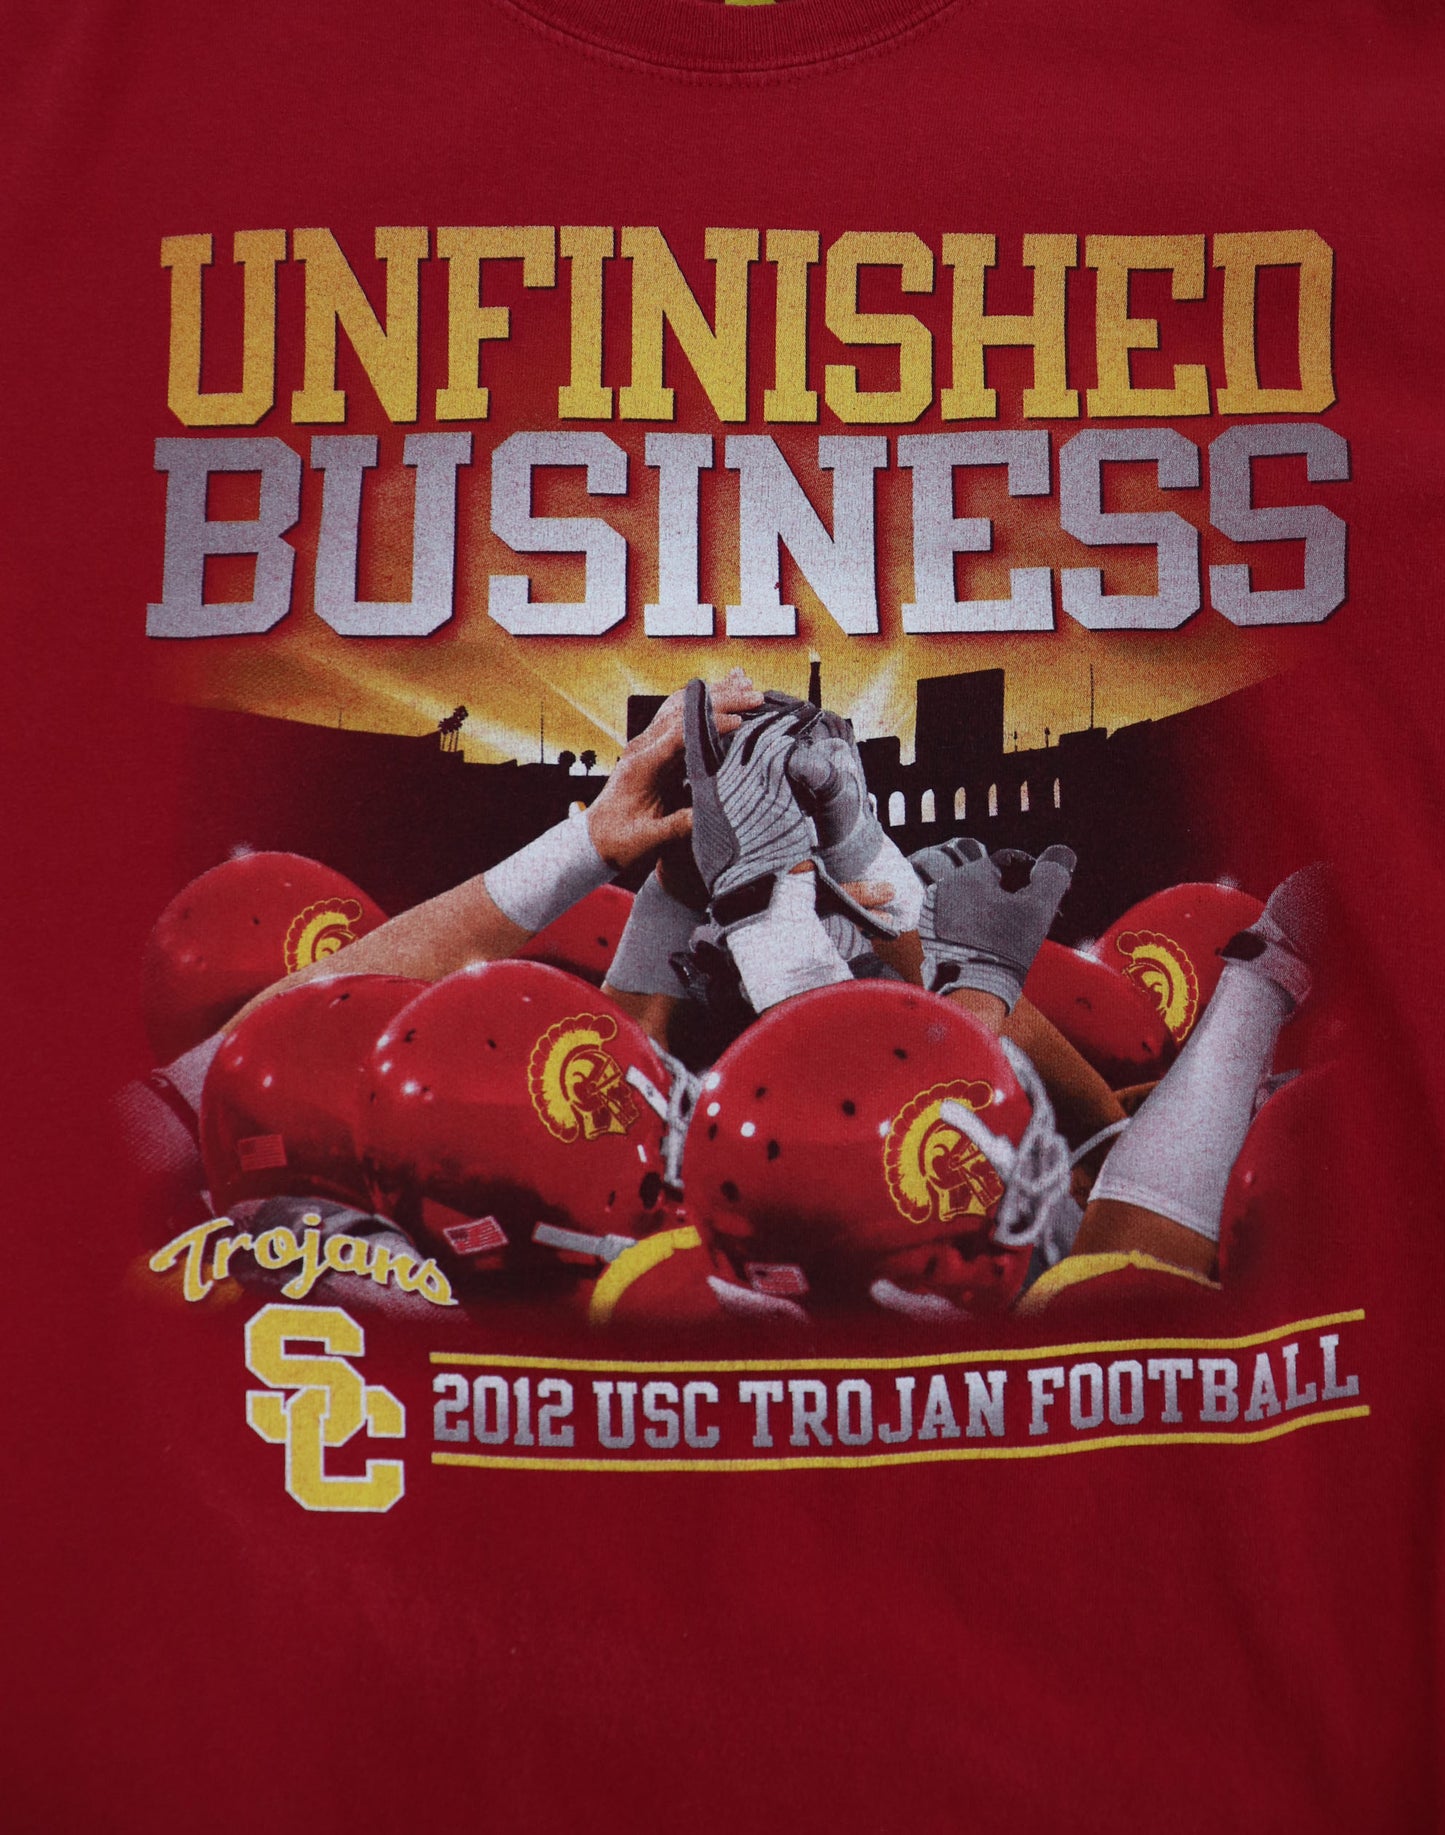 UNFINISHED BUSINESS USC FOOTBALL 2012